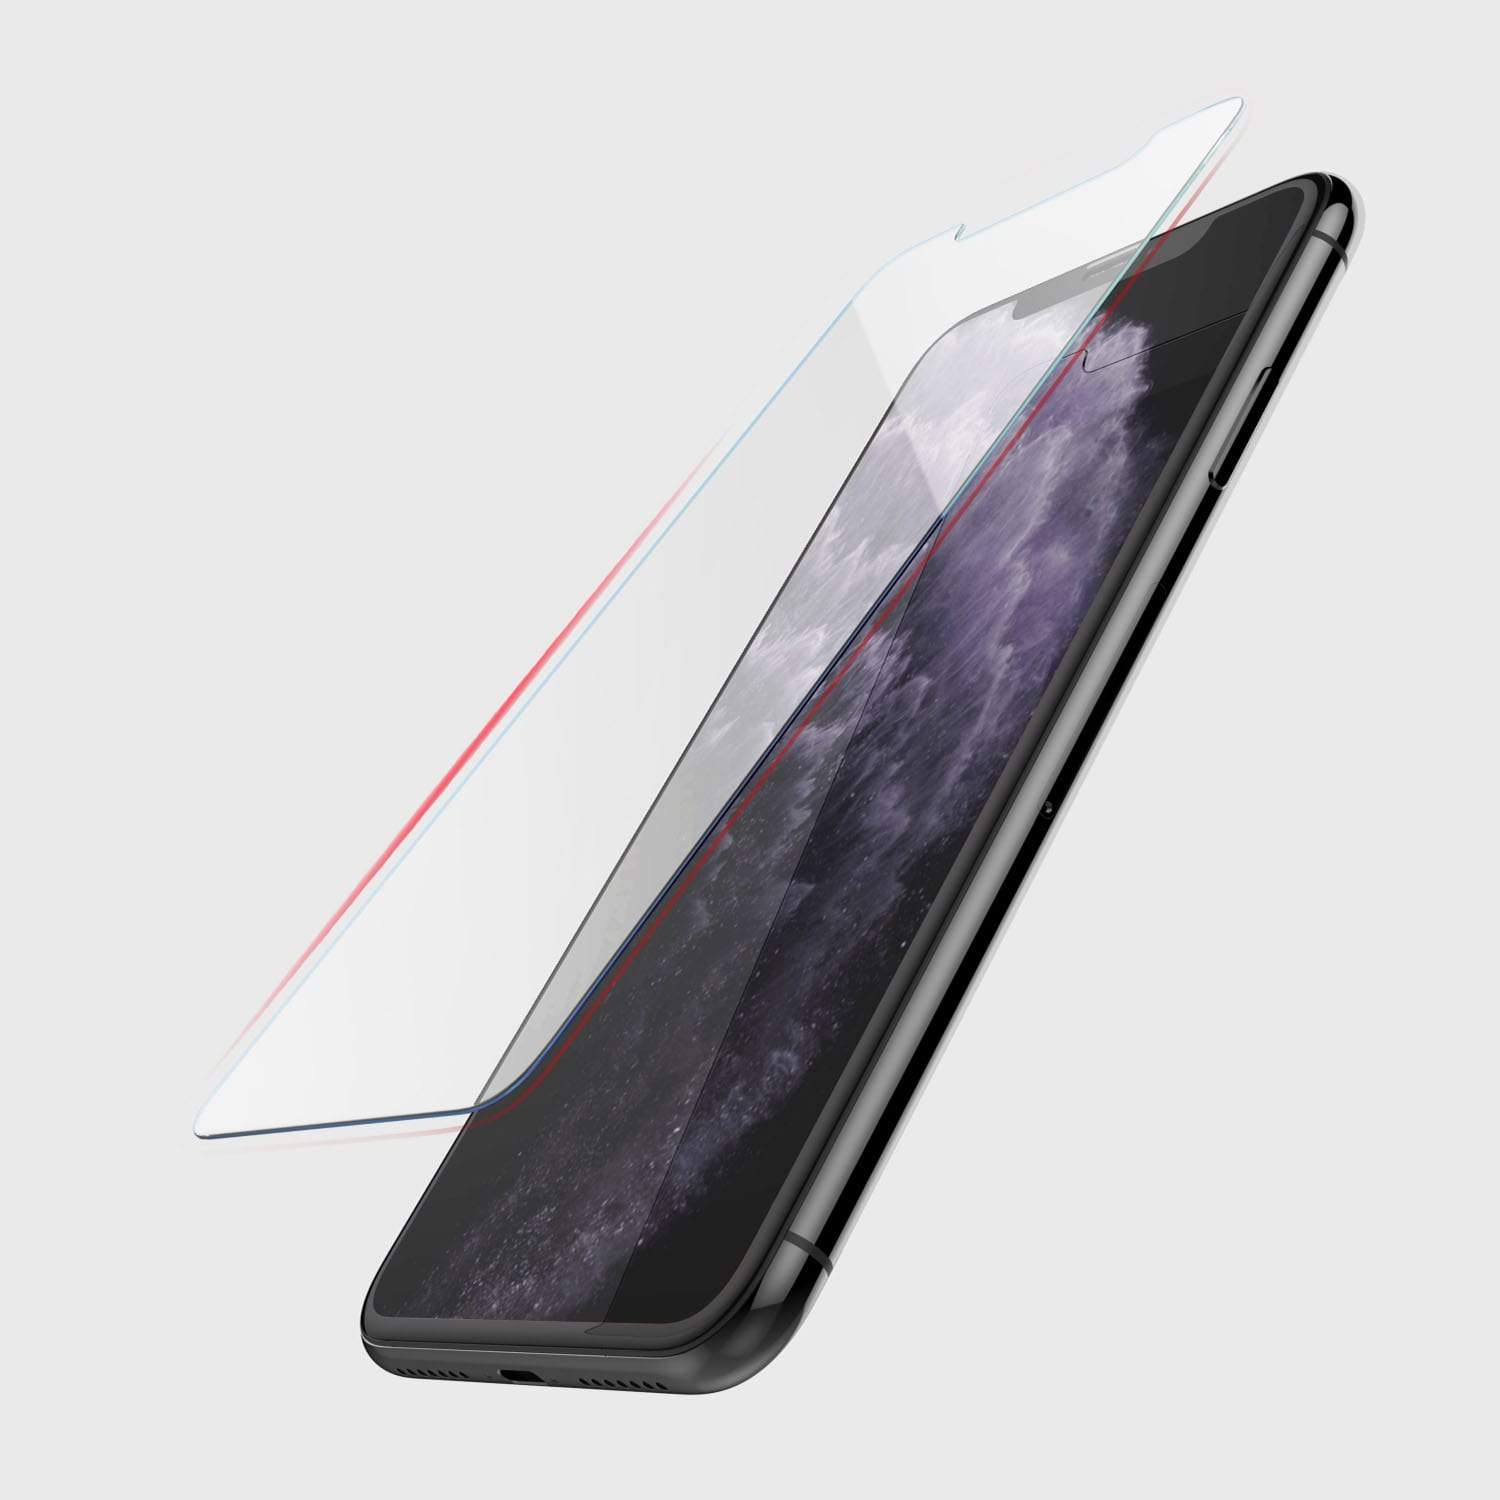 Defense Glass edge to edge is hovering over a black iphone 11 pro max